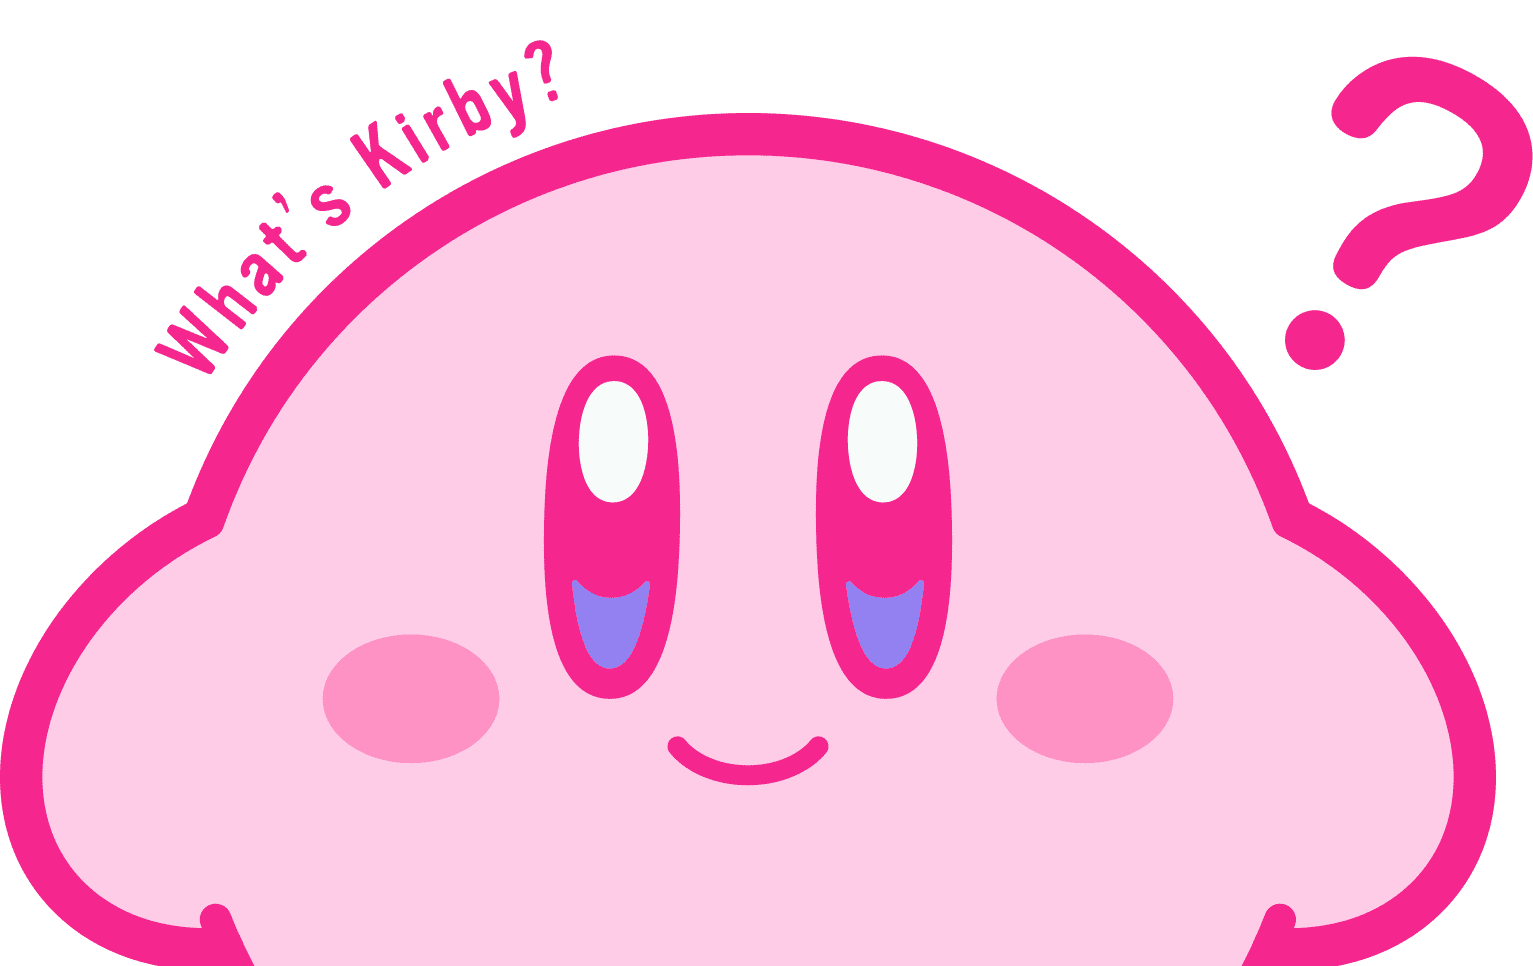 What's Kirby?